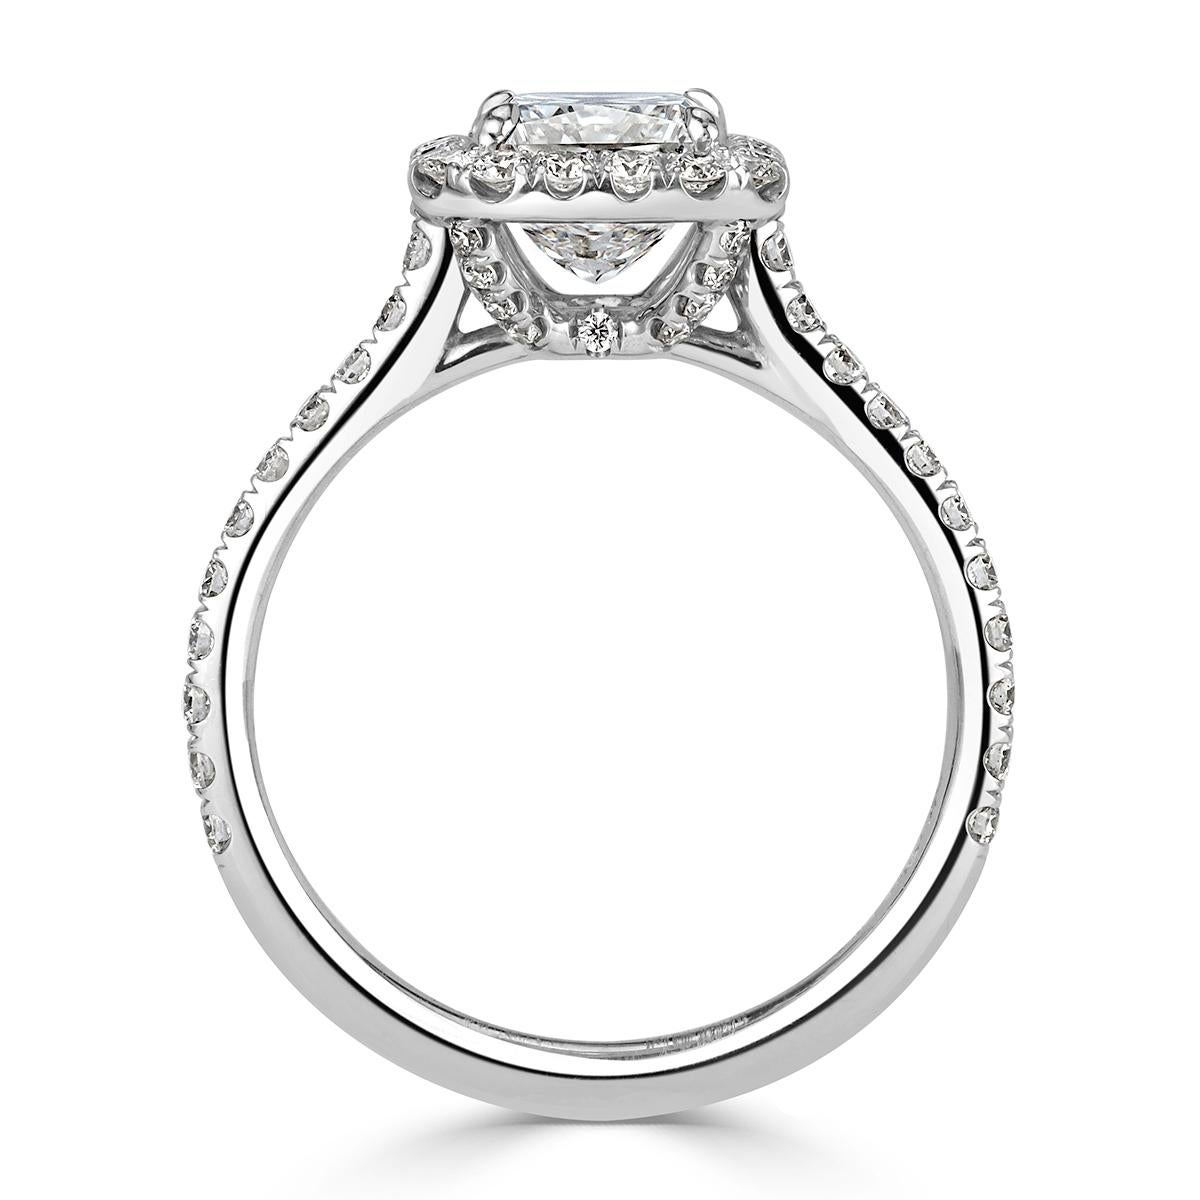 This one of a kind diamond engagement ring showcases a 2.02ct radiant cut center diamond, GIA certified at E-SI1. It is complimented to perfection by a dazzling halo of round brilliant cut diamonds and one row of shimmering diamonds micro pavé set